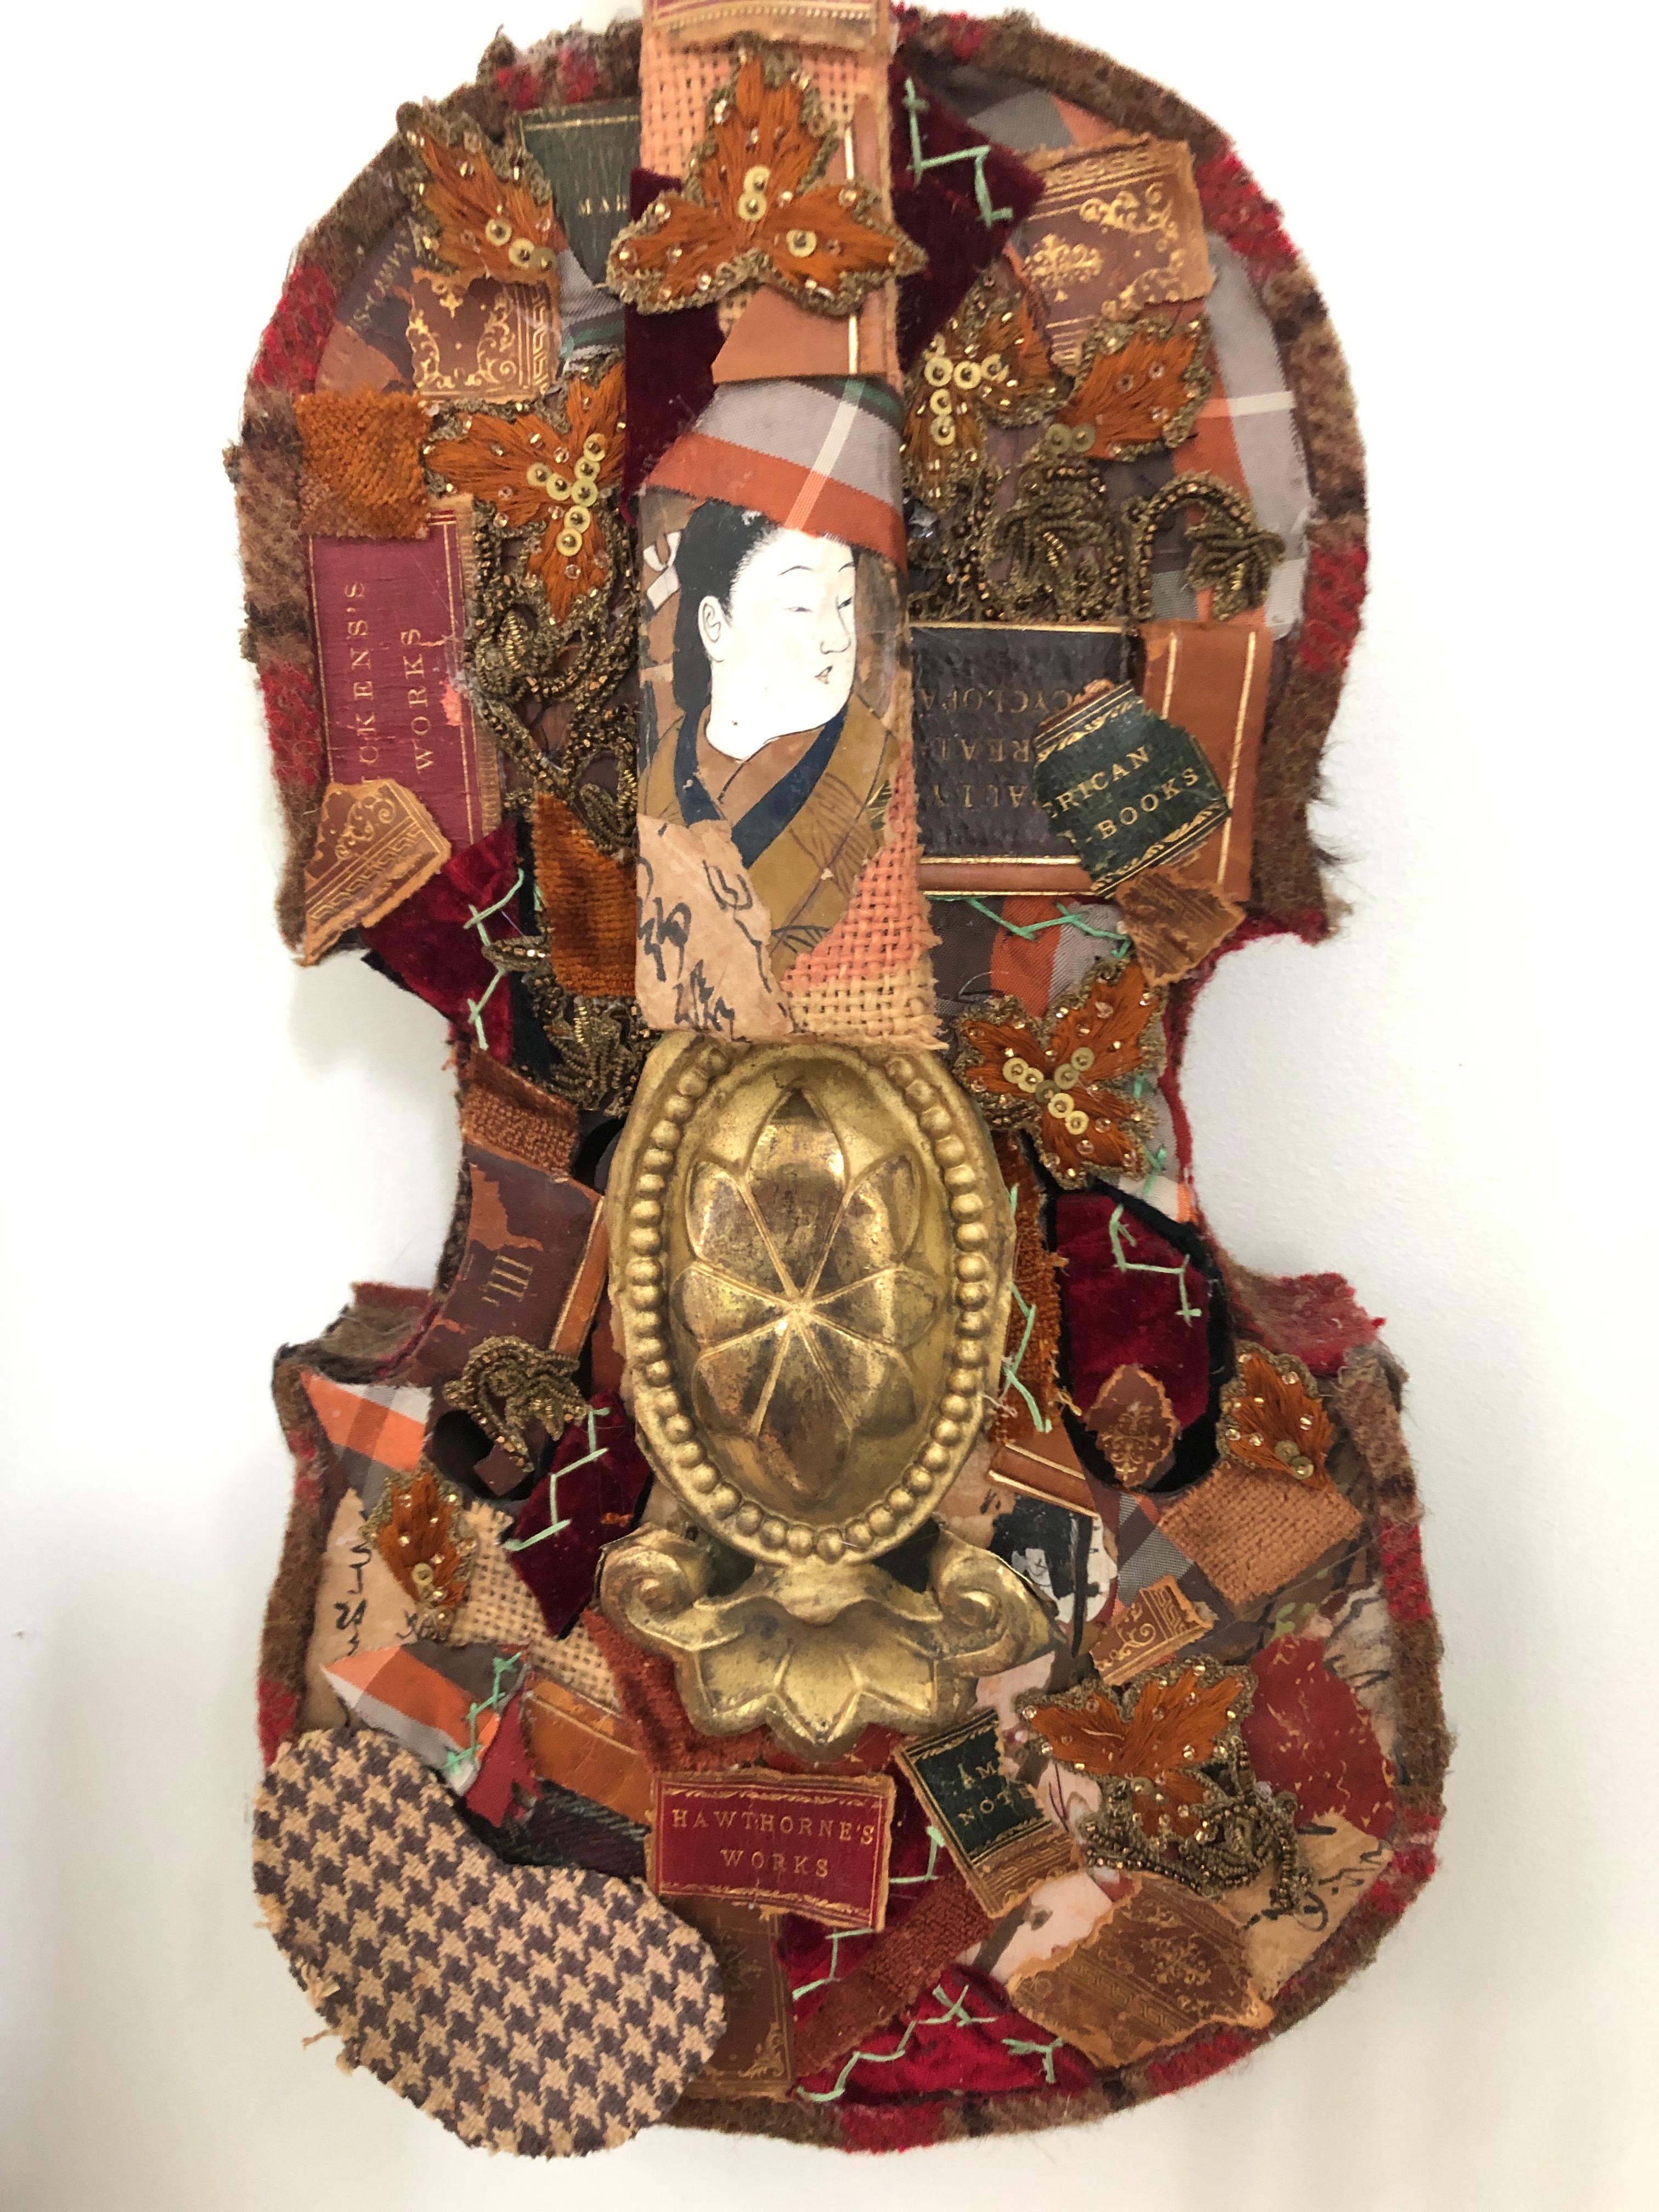 A rich mixed-media collage on an antique violin having meticulously layered paper ephemera with a Japanese motife, leather book bindings, bits and pieces from a crazy quilt, vintage trimmings and tin cutout. A splendid wall sculpture in brown, gold,